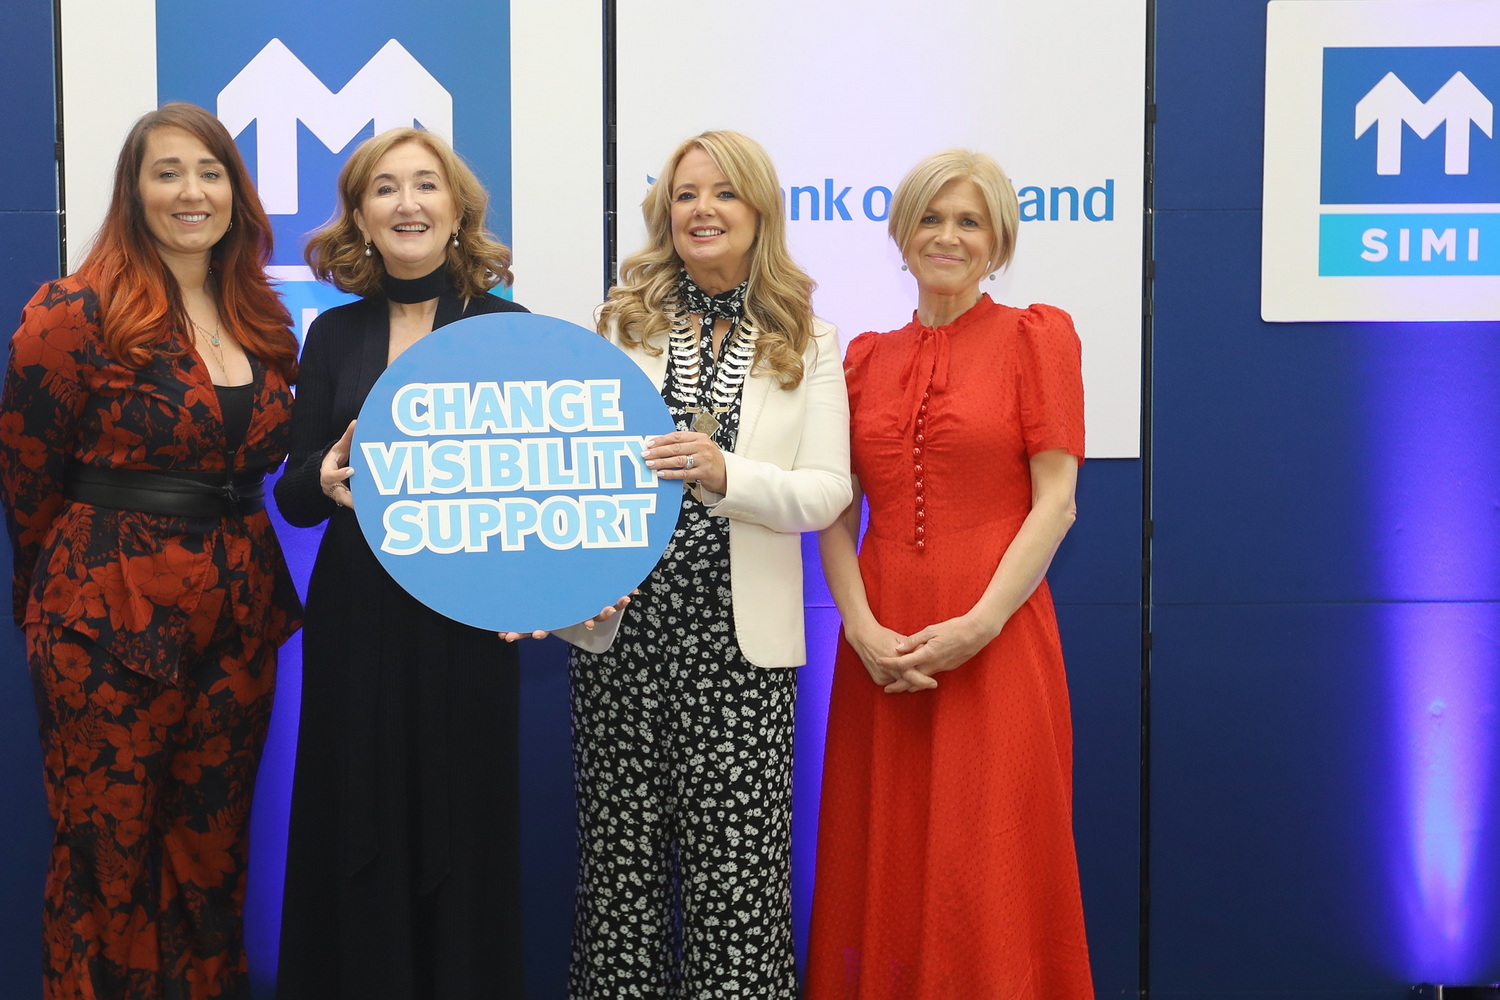 Car Industry News | Women in the car industry recommend the career | CompleteCar.ie